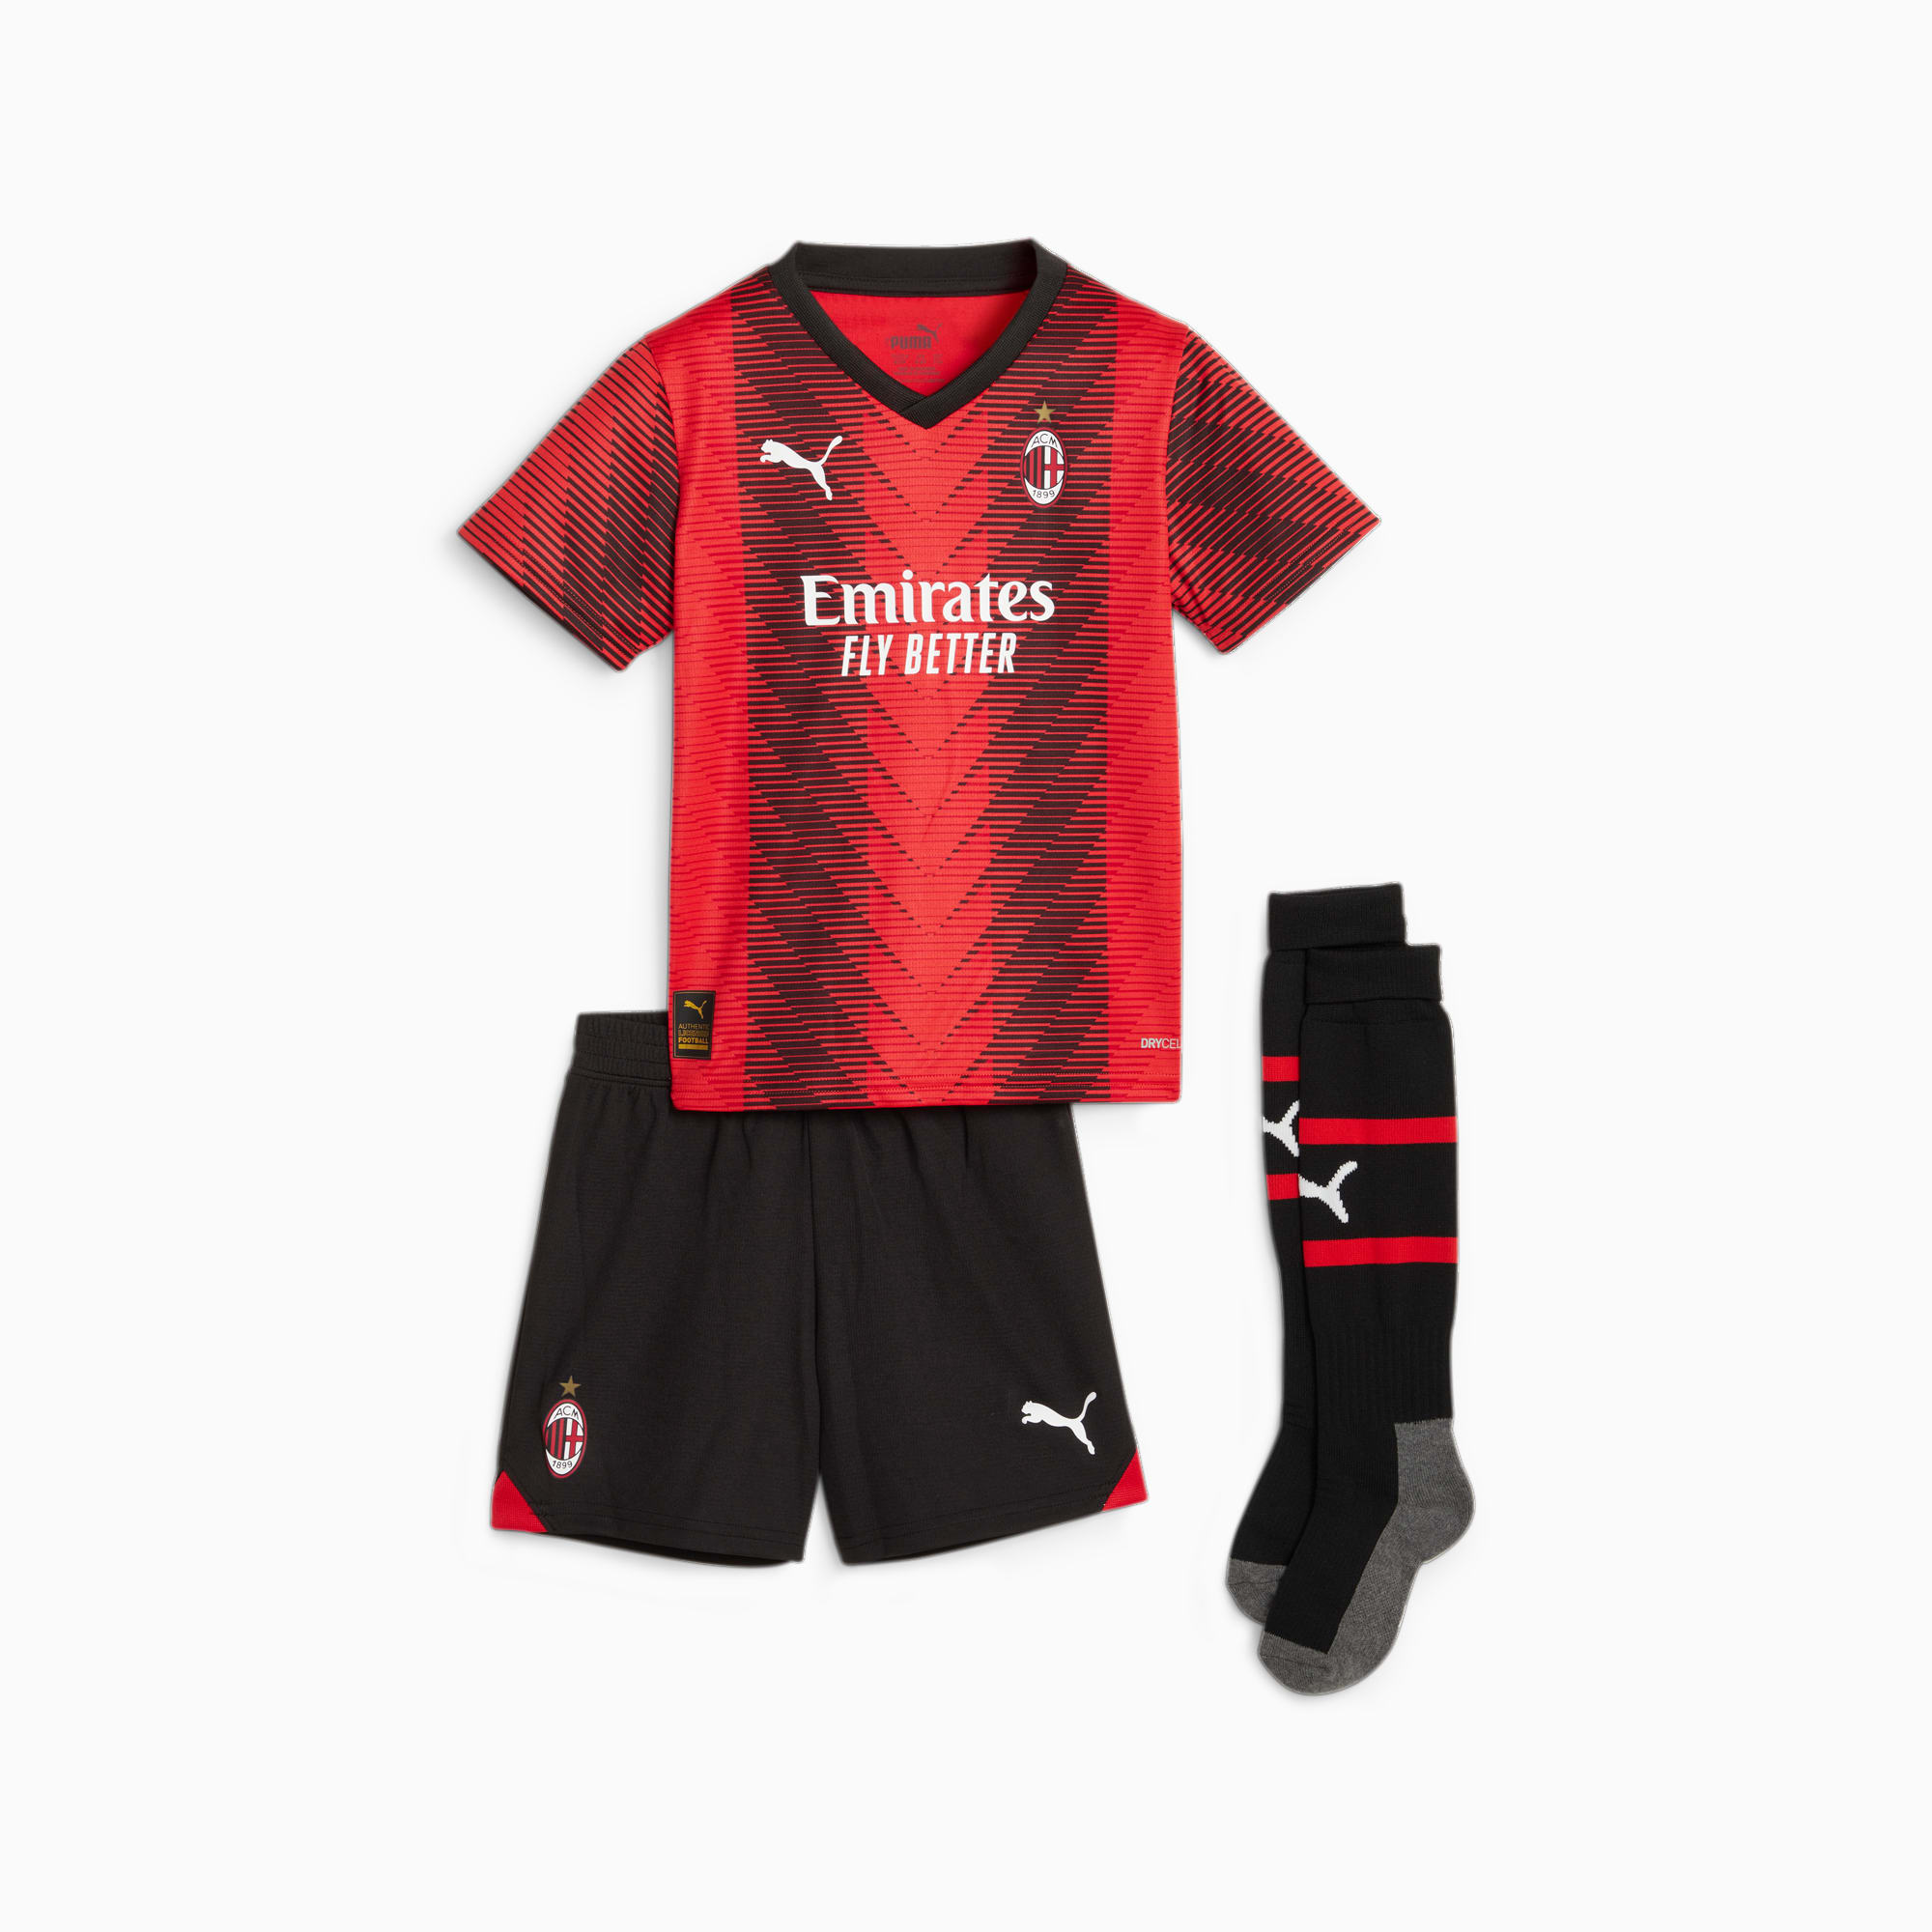 PUMA A.C. Milan 23/24 Home Mini Kit, For All Time Red/Black